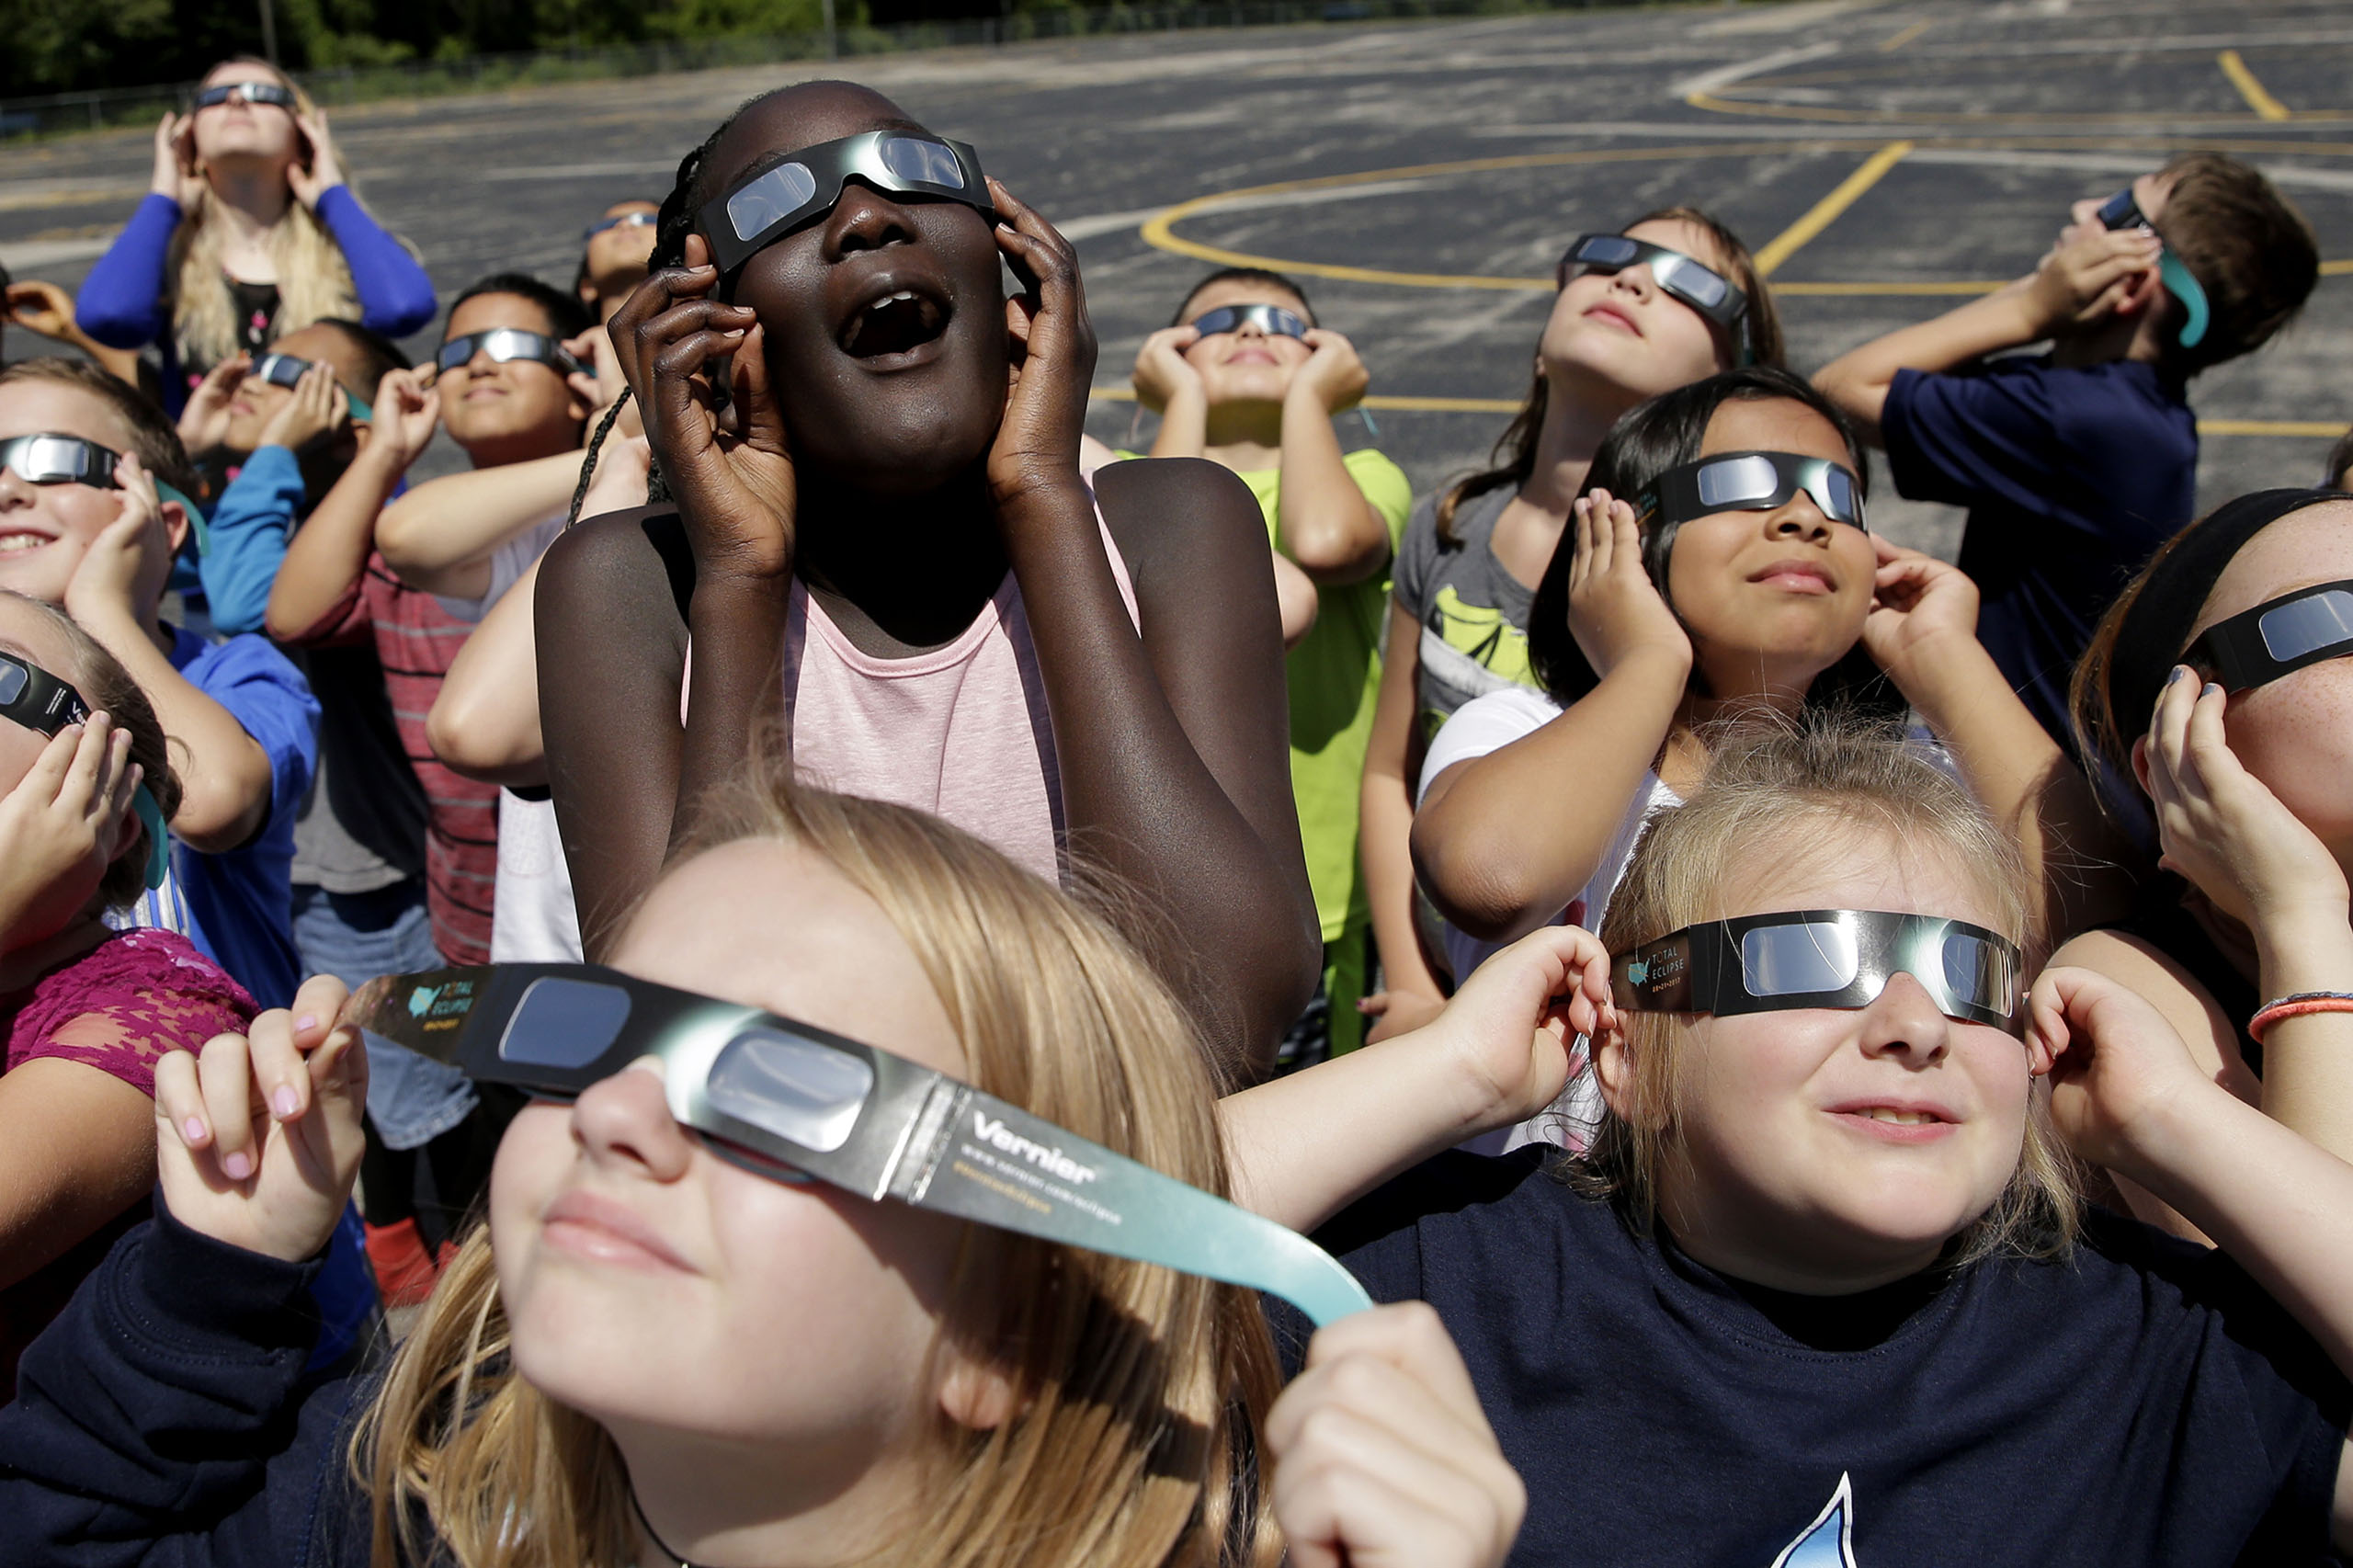 Fourth graders at Clardy Elementary School in Kansas City, Mo. practice the proper use of their eclipse glasses on Aug. 18, 2017 in anticipation of the solar eclipse. (Charlie Riedel—AP)